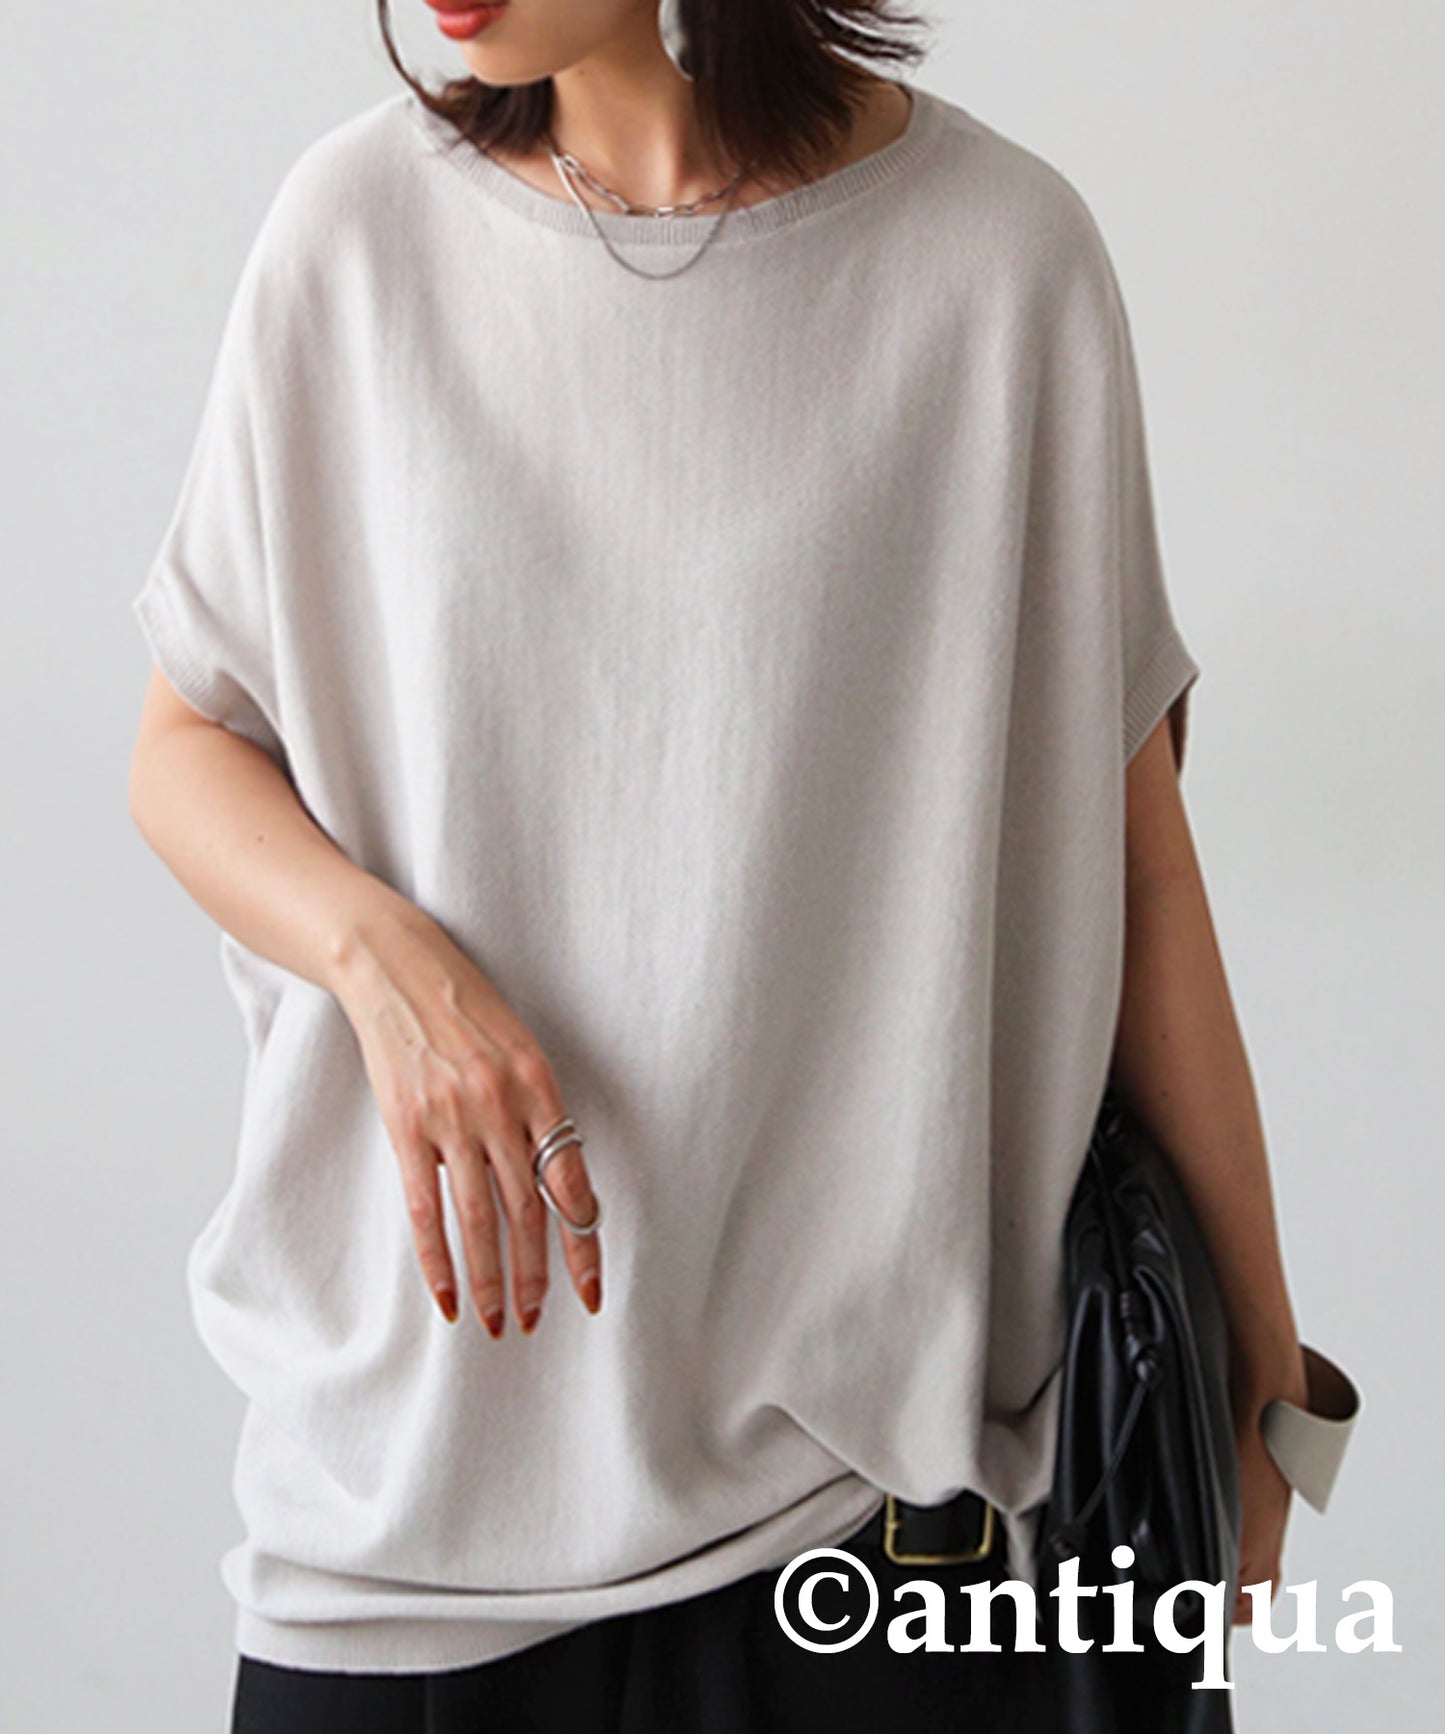 Dolman Ladies Knit Tops Short Sleeve French